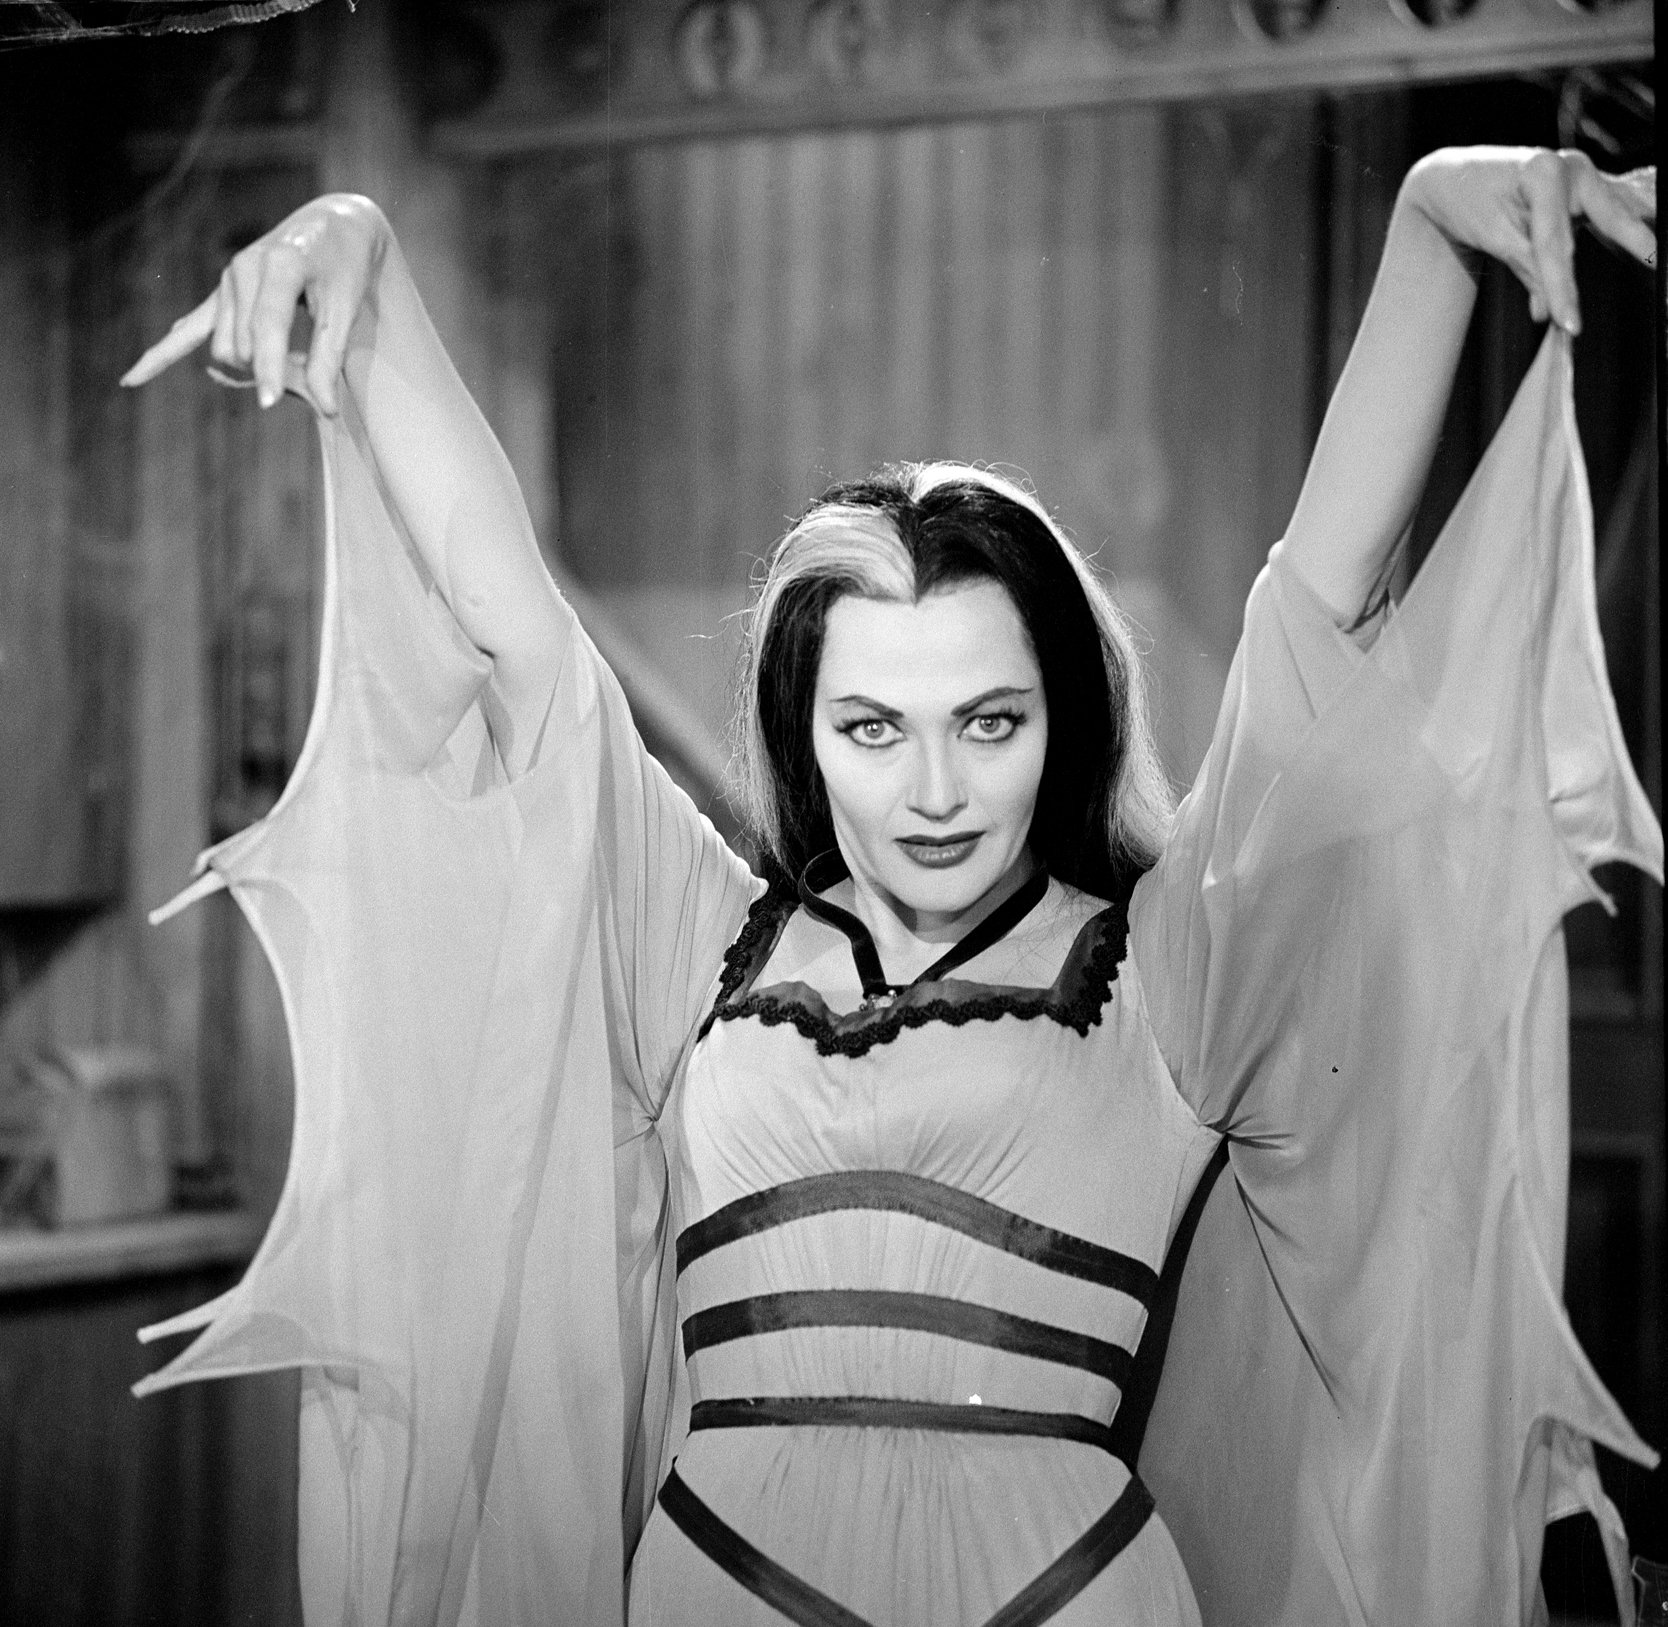 ‘The Munsters’: A Look at 4 Actors Who’ve Played Lily Munster